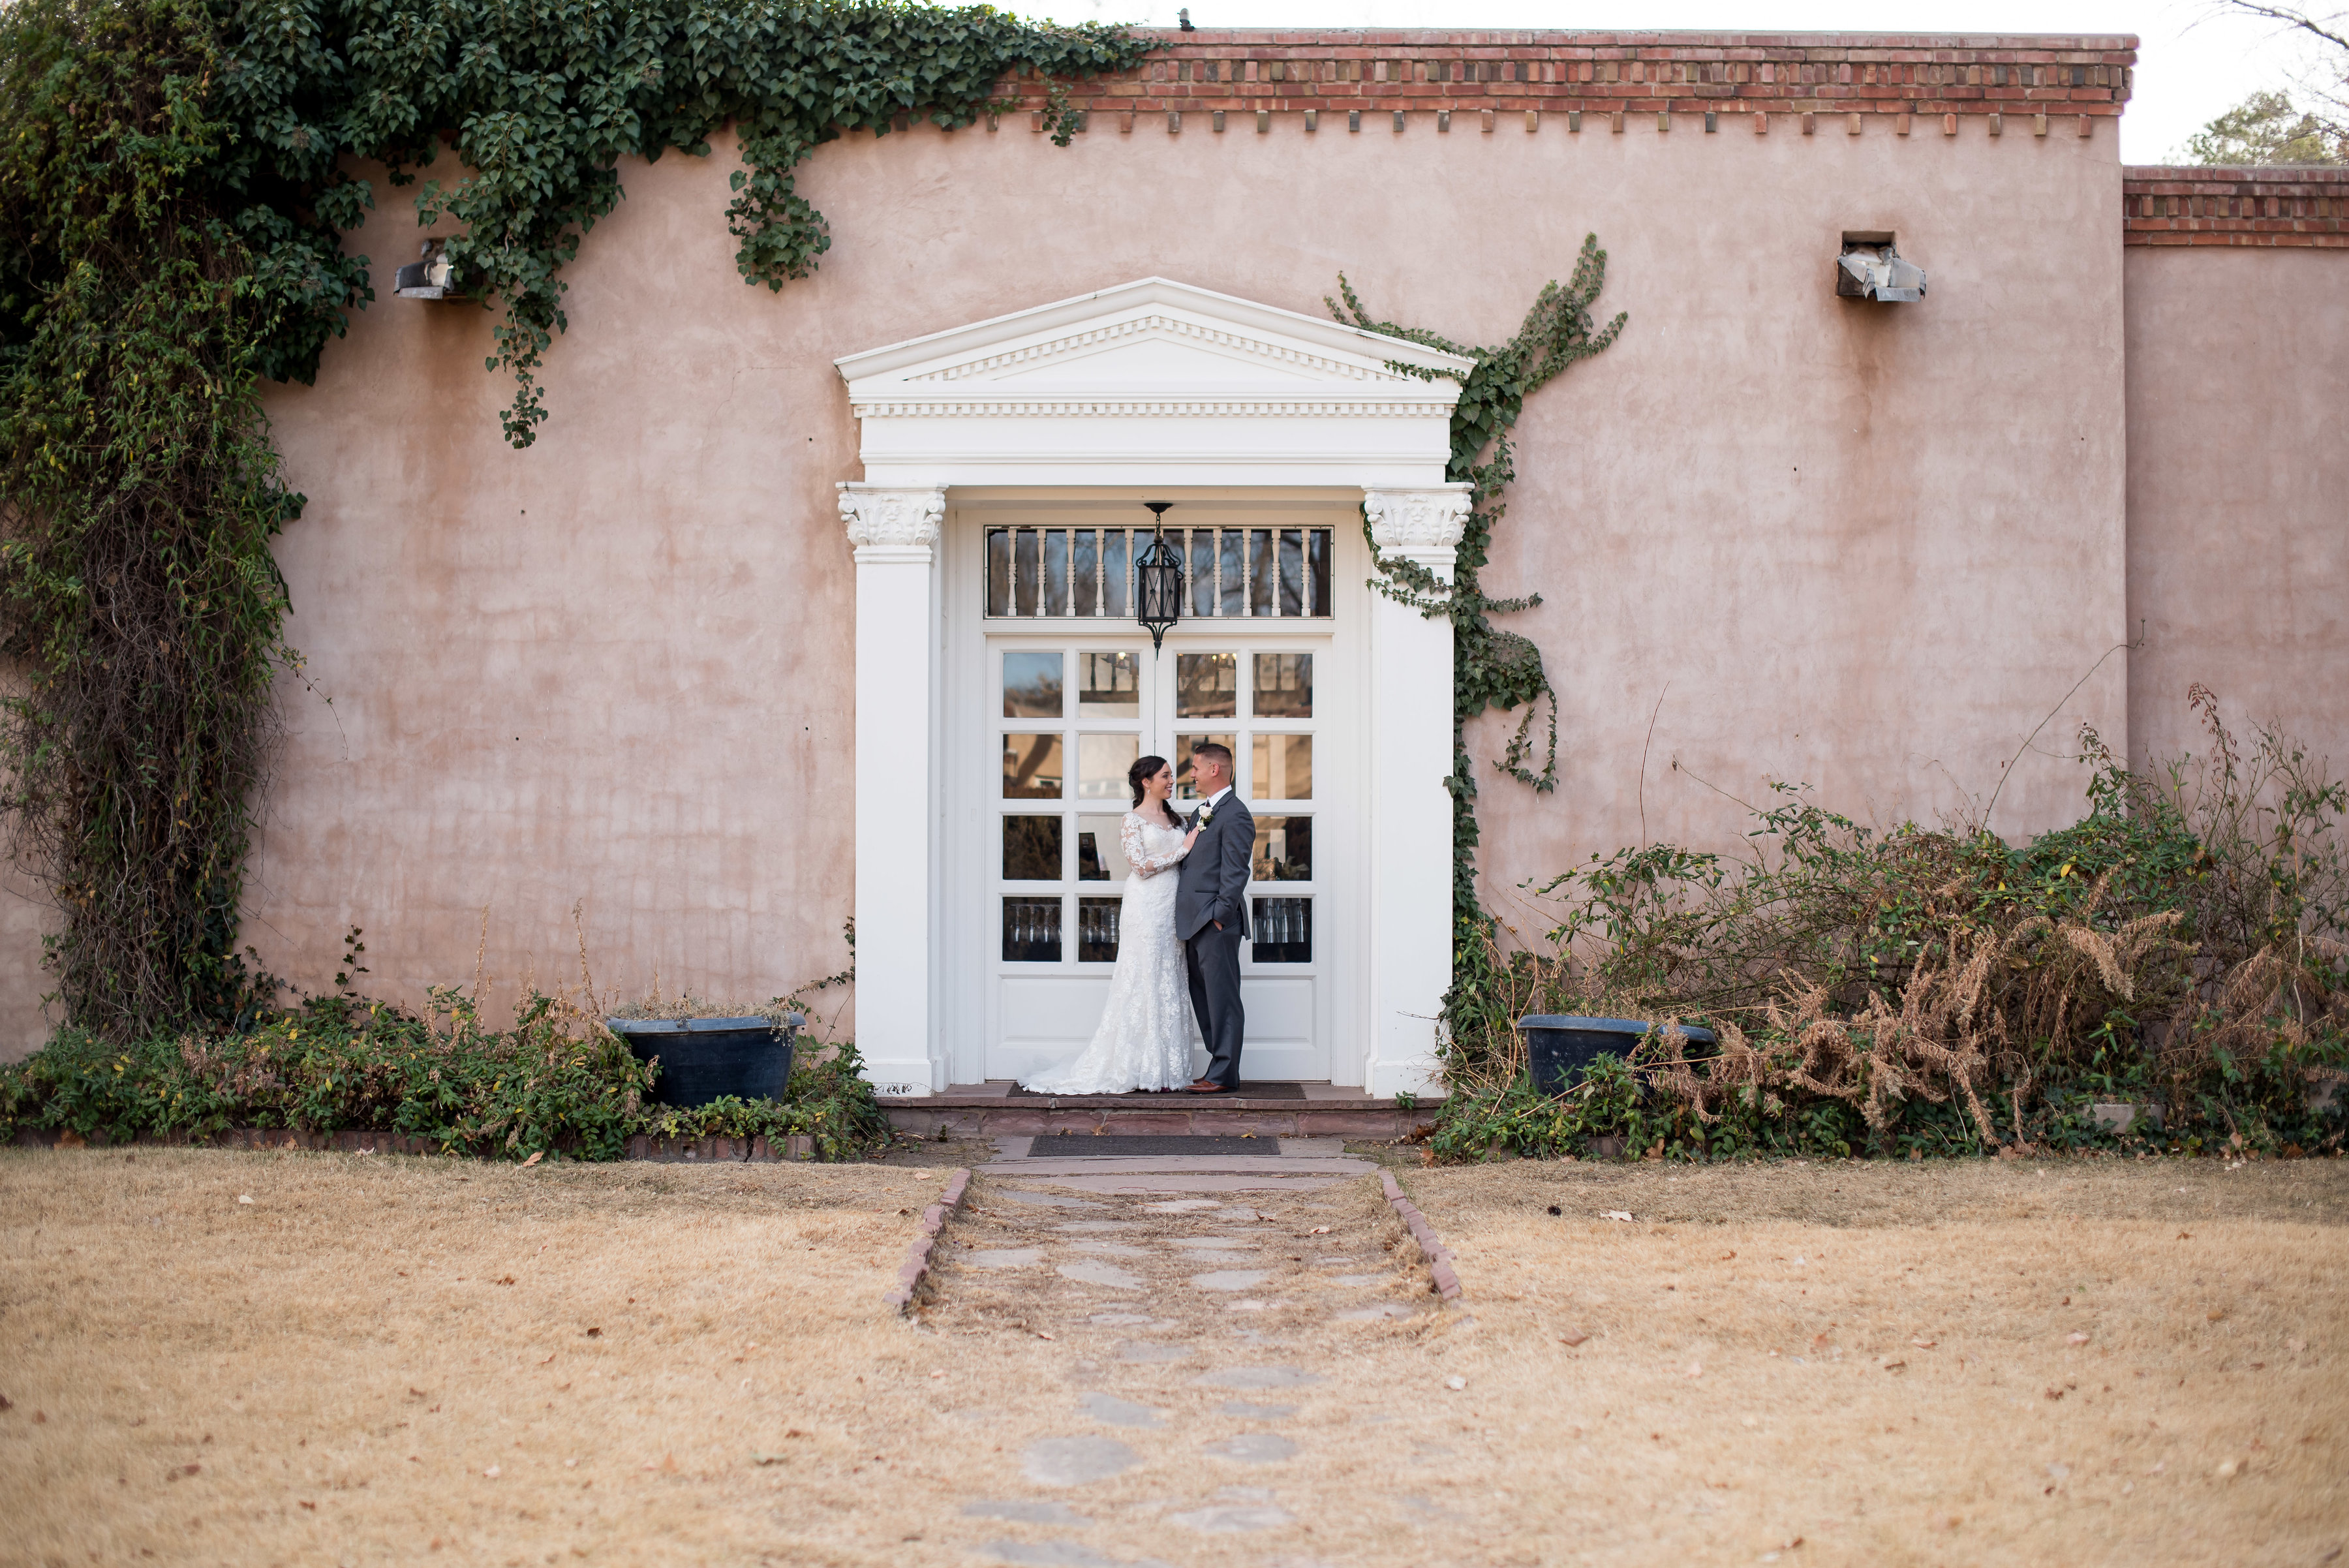 wedding planning design decor inspo real local New Mexico Perfect Wedding Guide outdoor couple love bride groom natural light ceremony first look romantic professional architecture historical farm